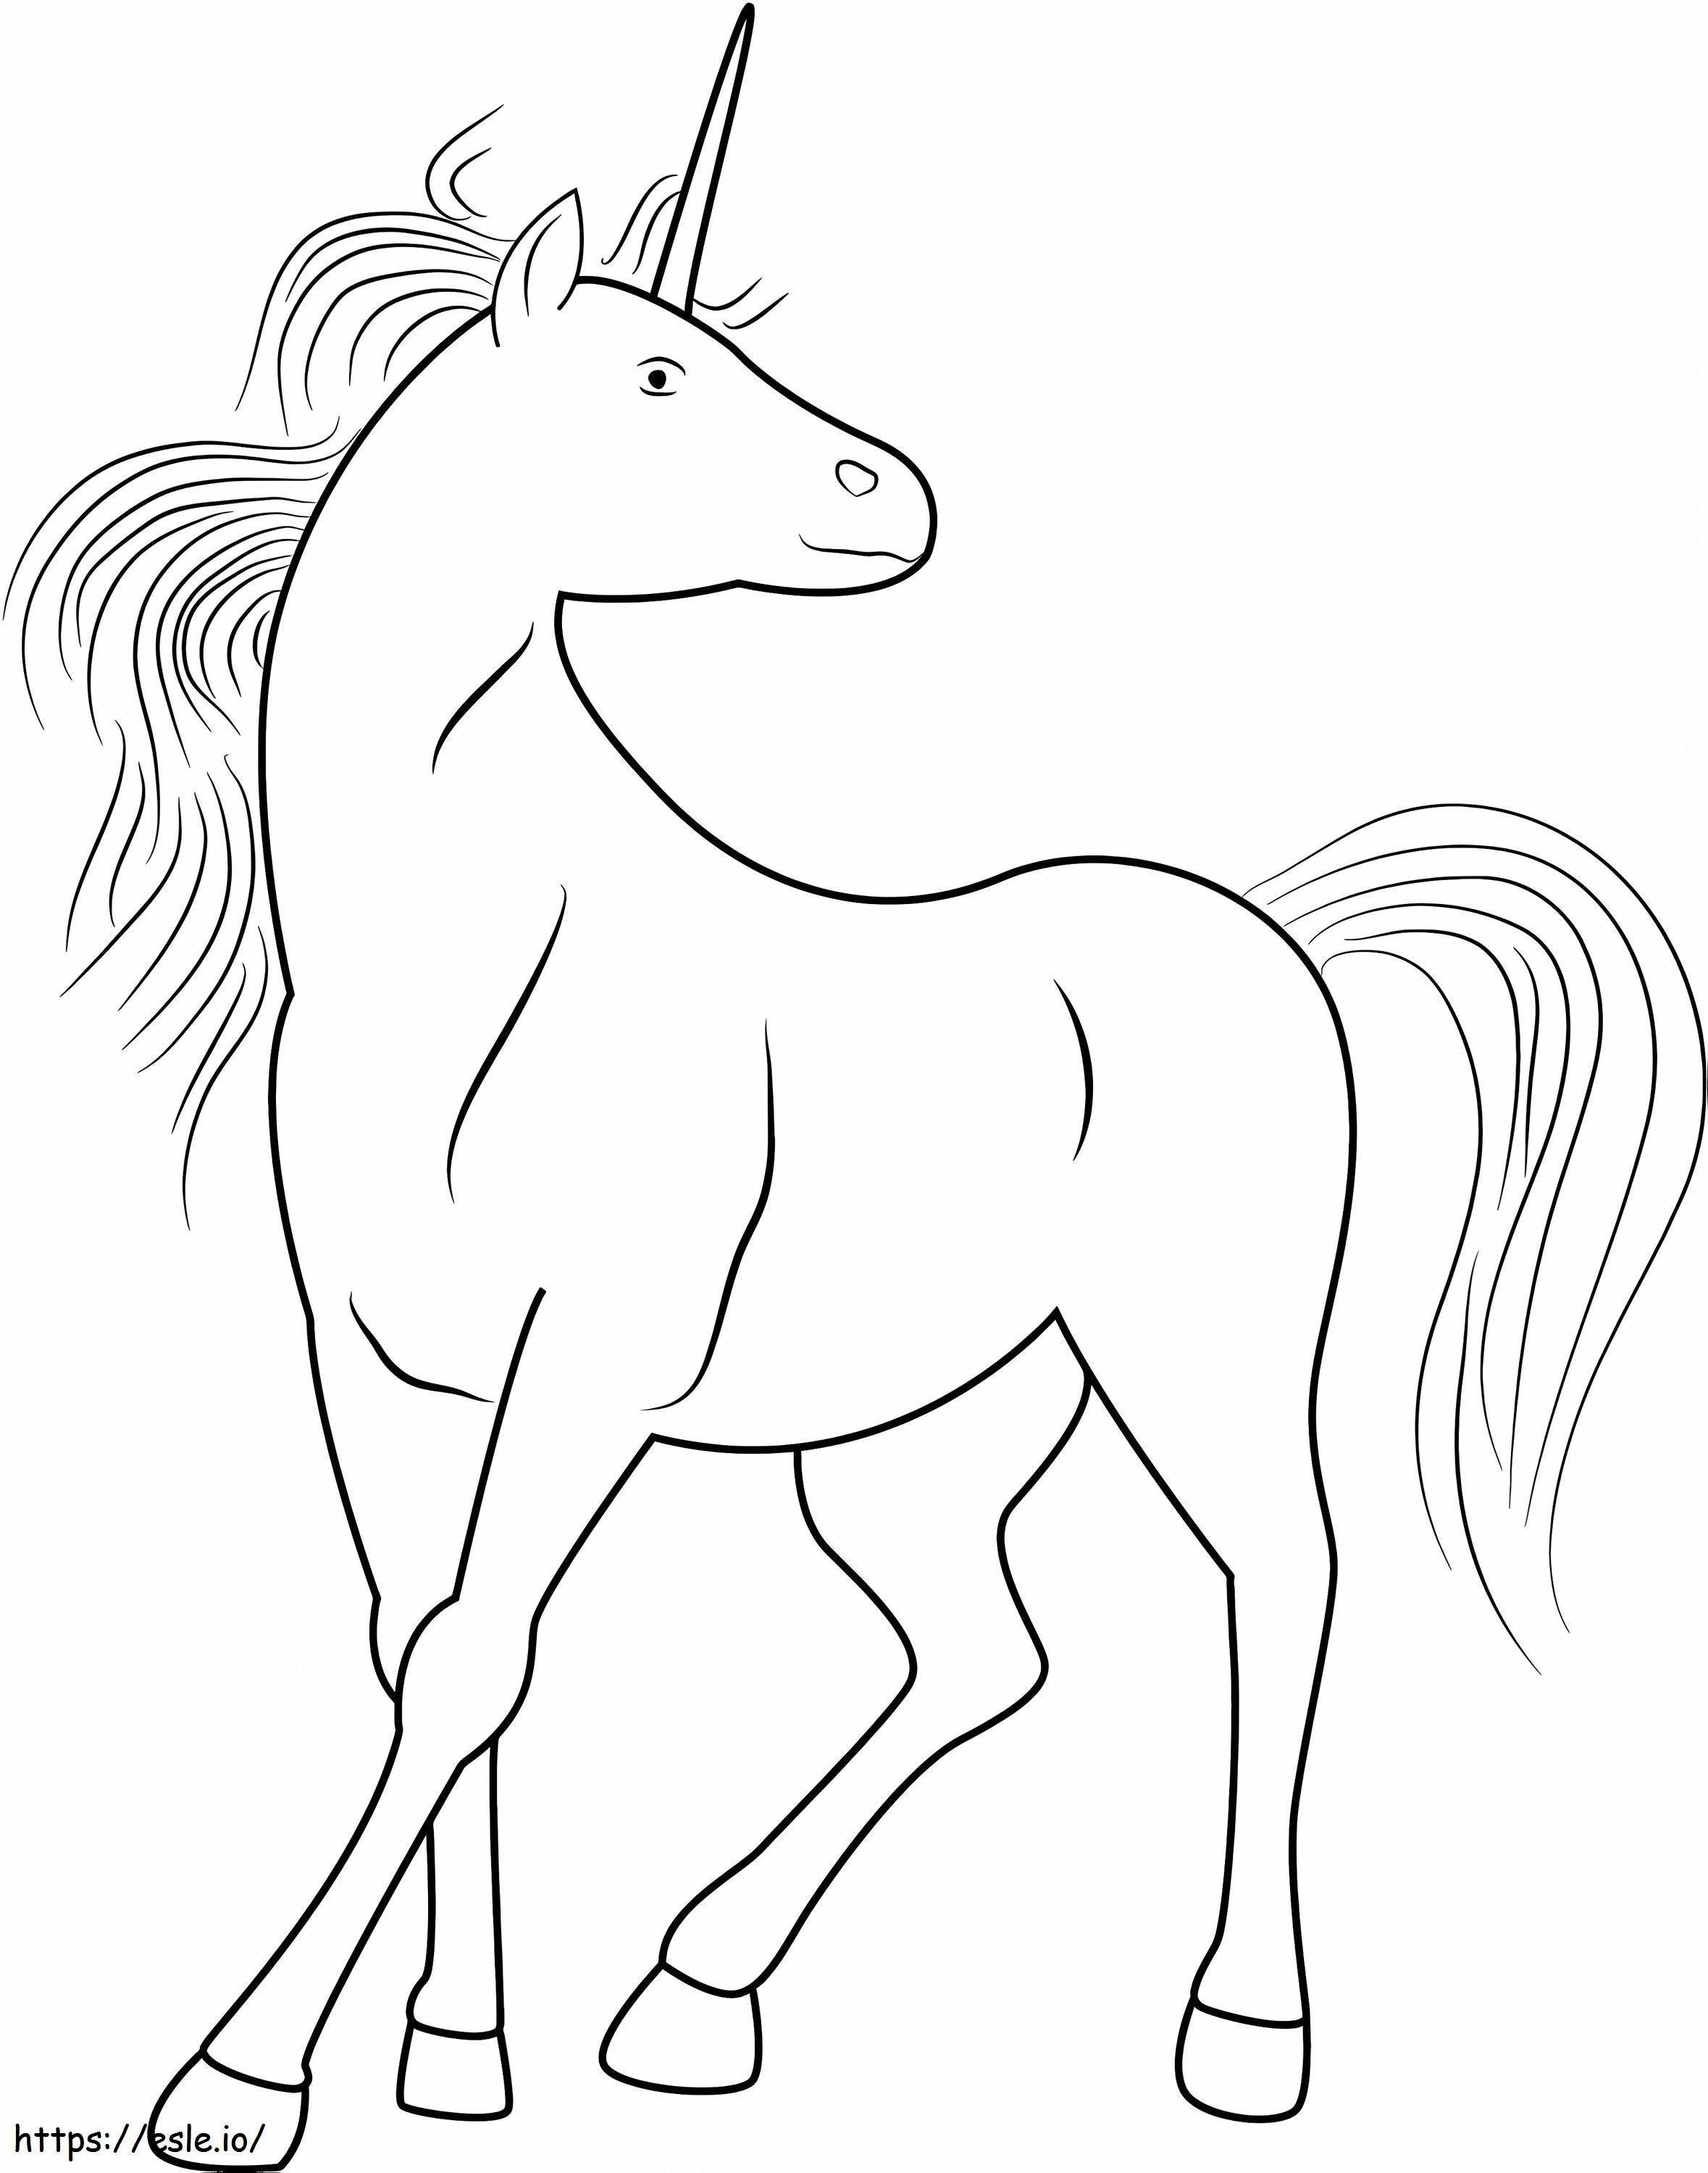 1529981926 10 coloring page